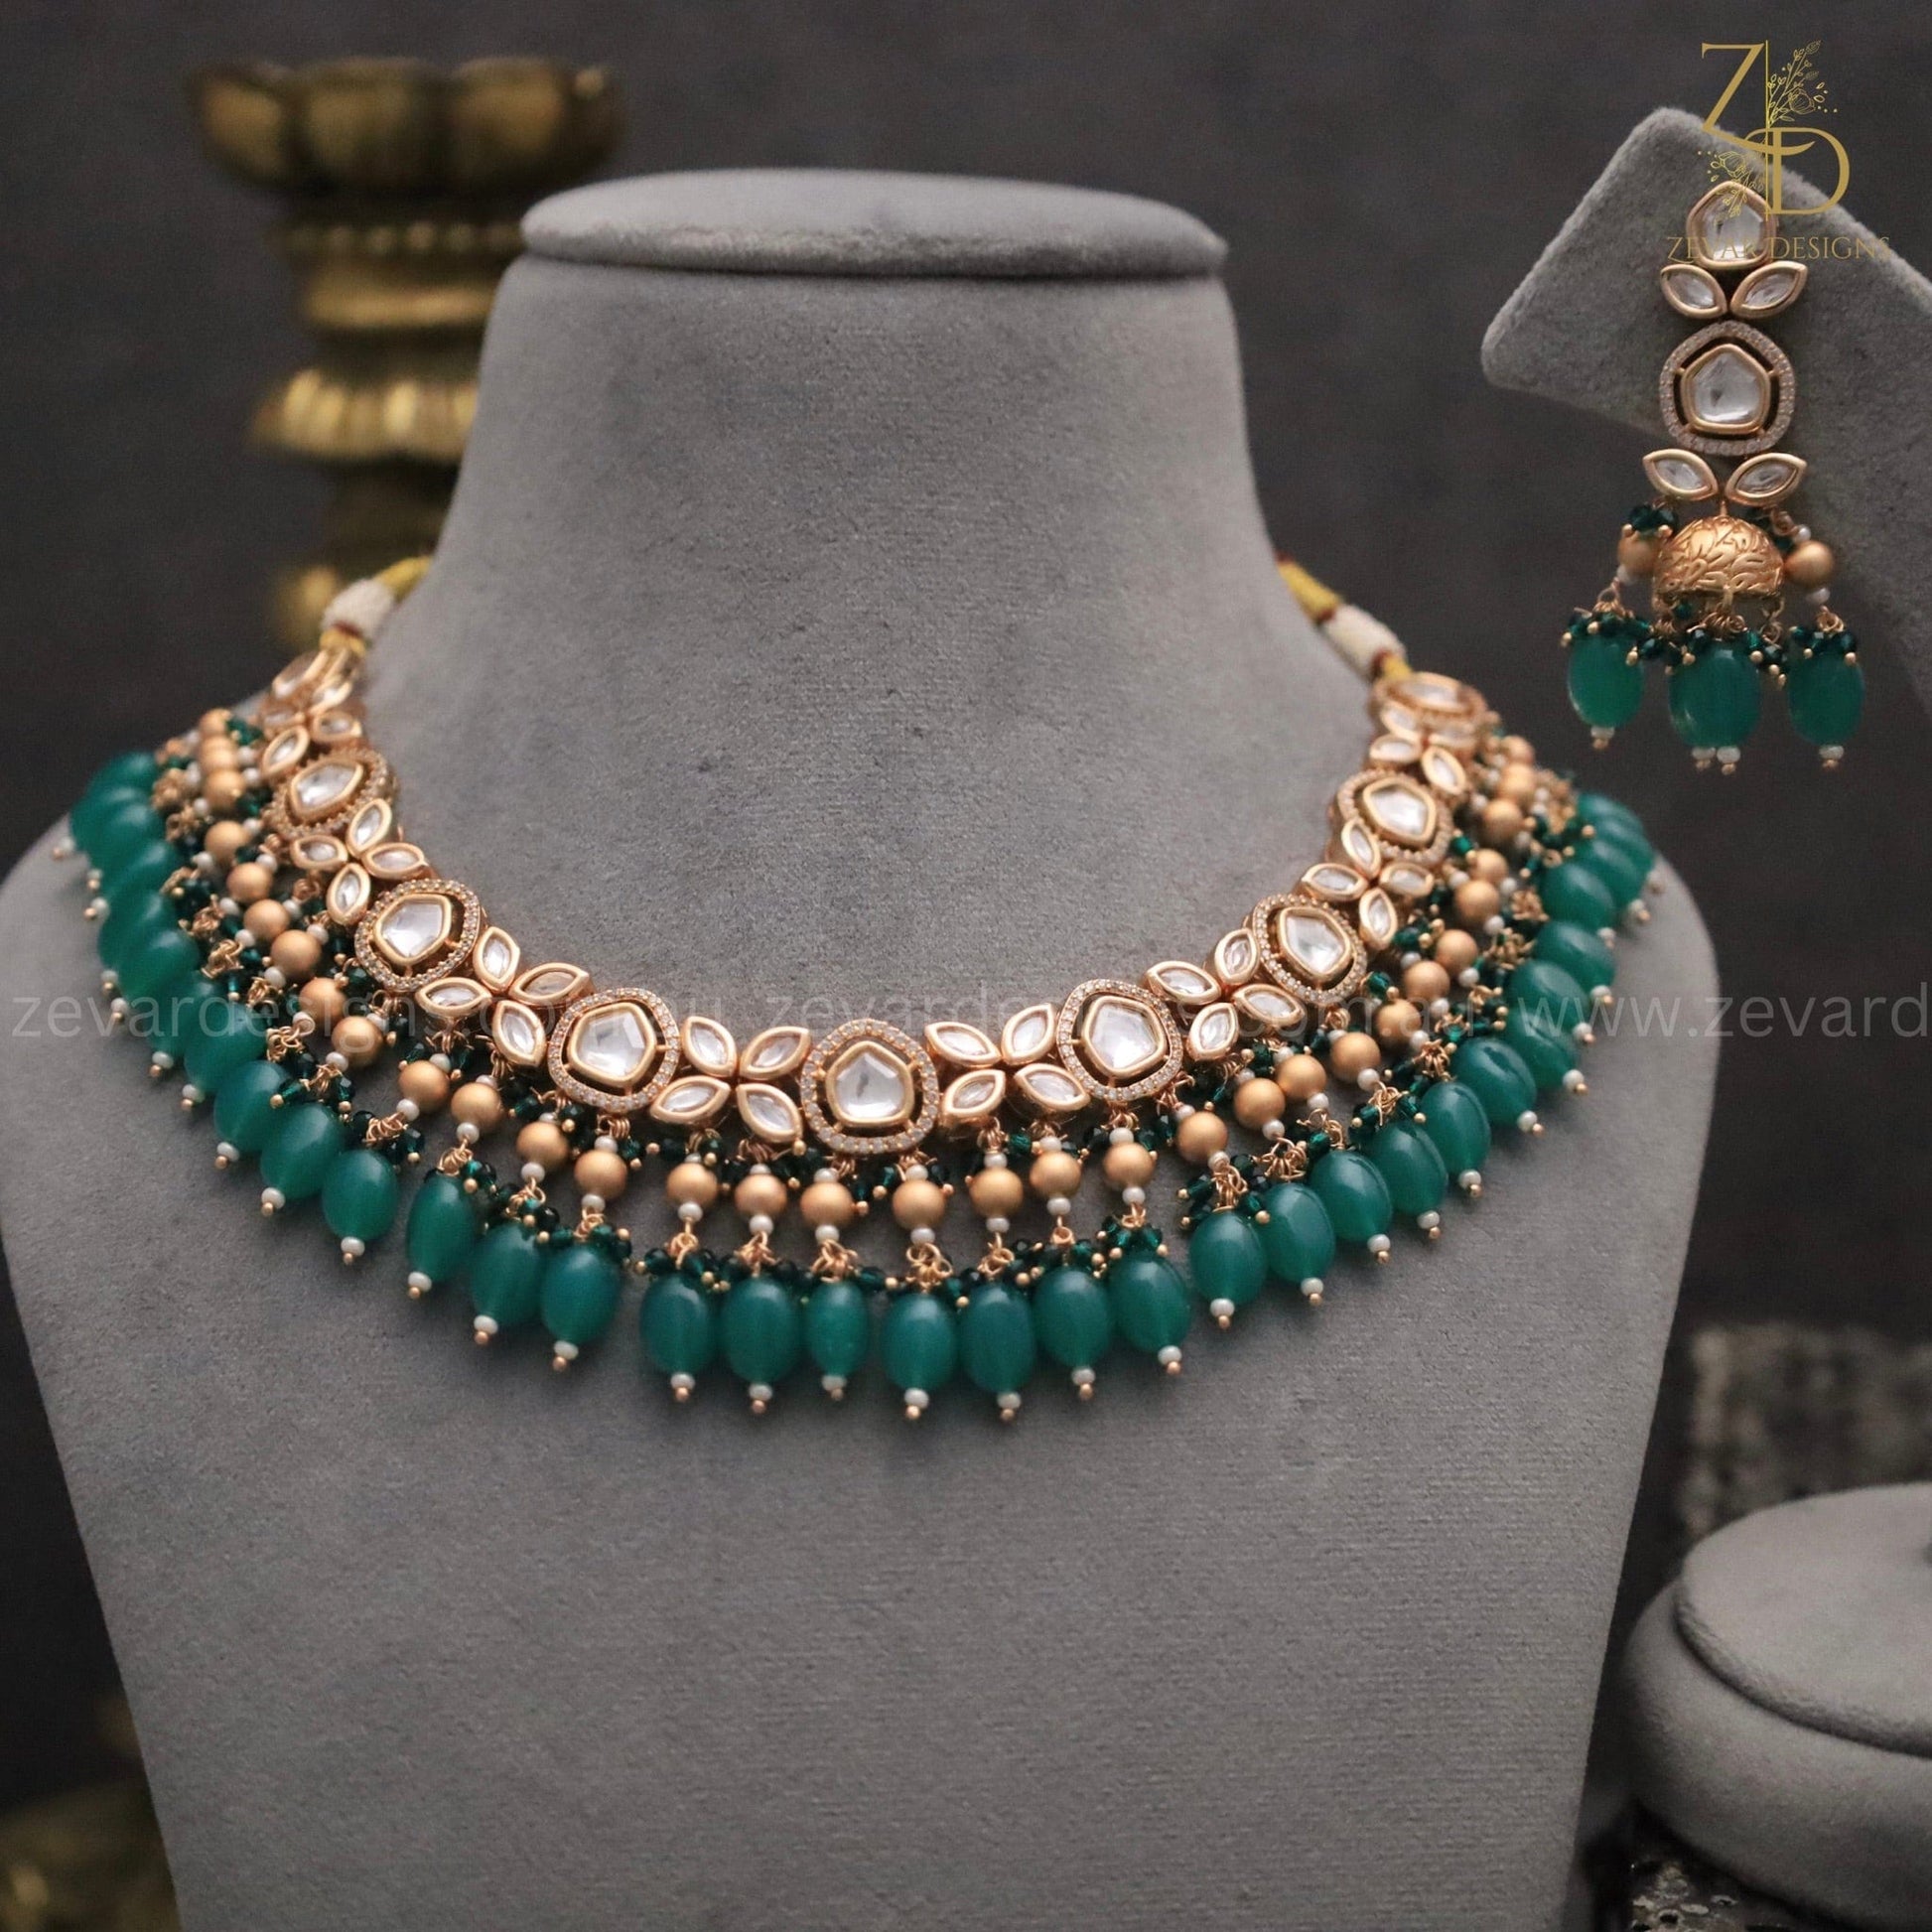 Zevar Designs Necklace Sets 18K Gold Plated Kundan Polki Beaded Necklace Set with Pearls & Emerald green drops